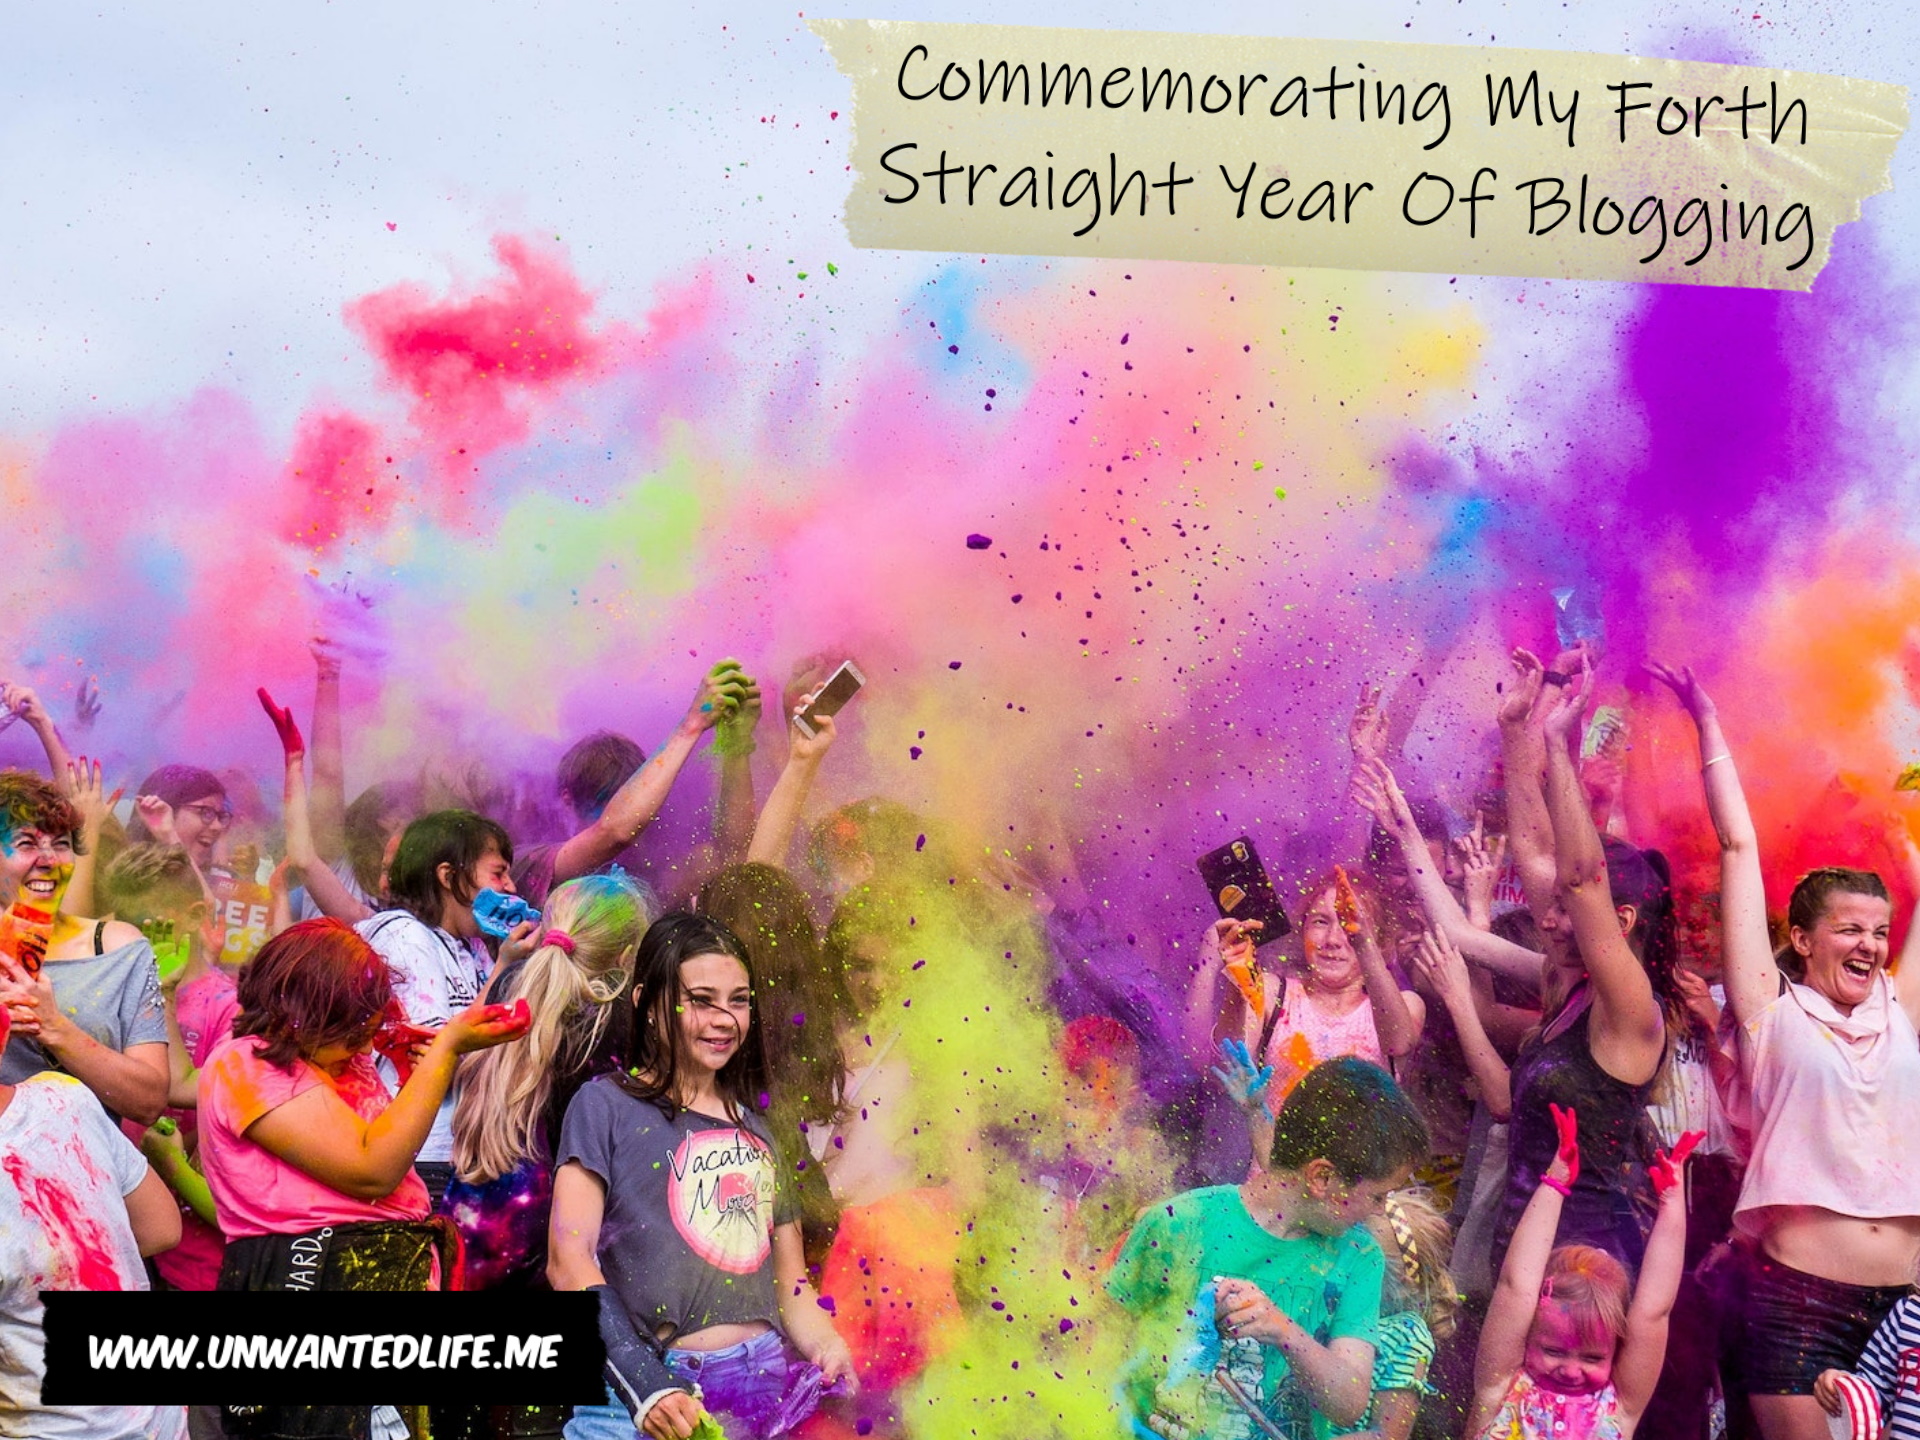 A group of people celebrating by throwing powdered paints around to represent the topic of the article - Commemorating My Forth Straight Year Of Blogging